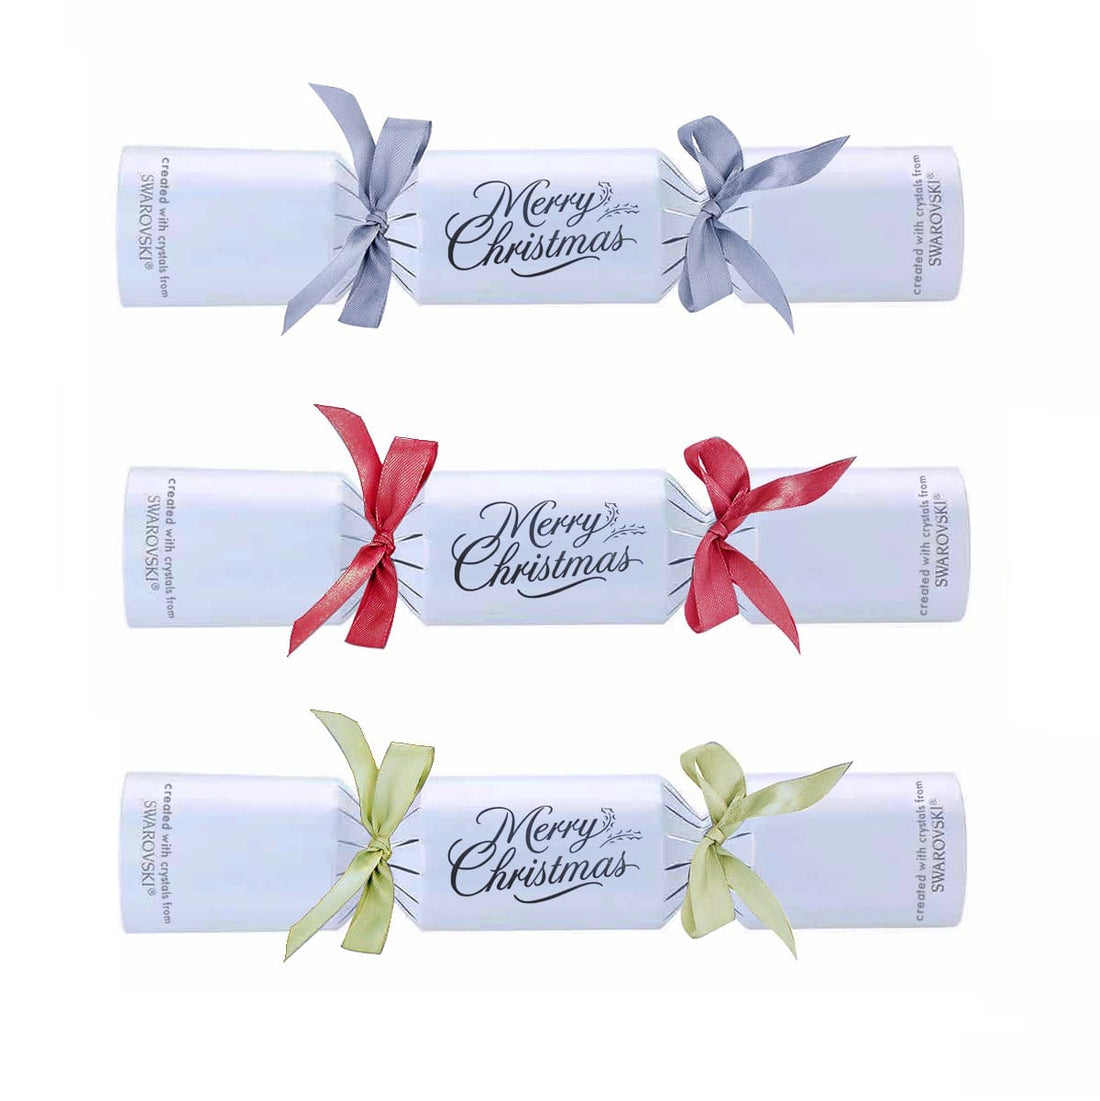 CHRISTMAS CRACKERS - Crystal Jewellery Gifts